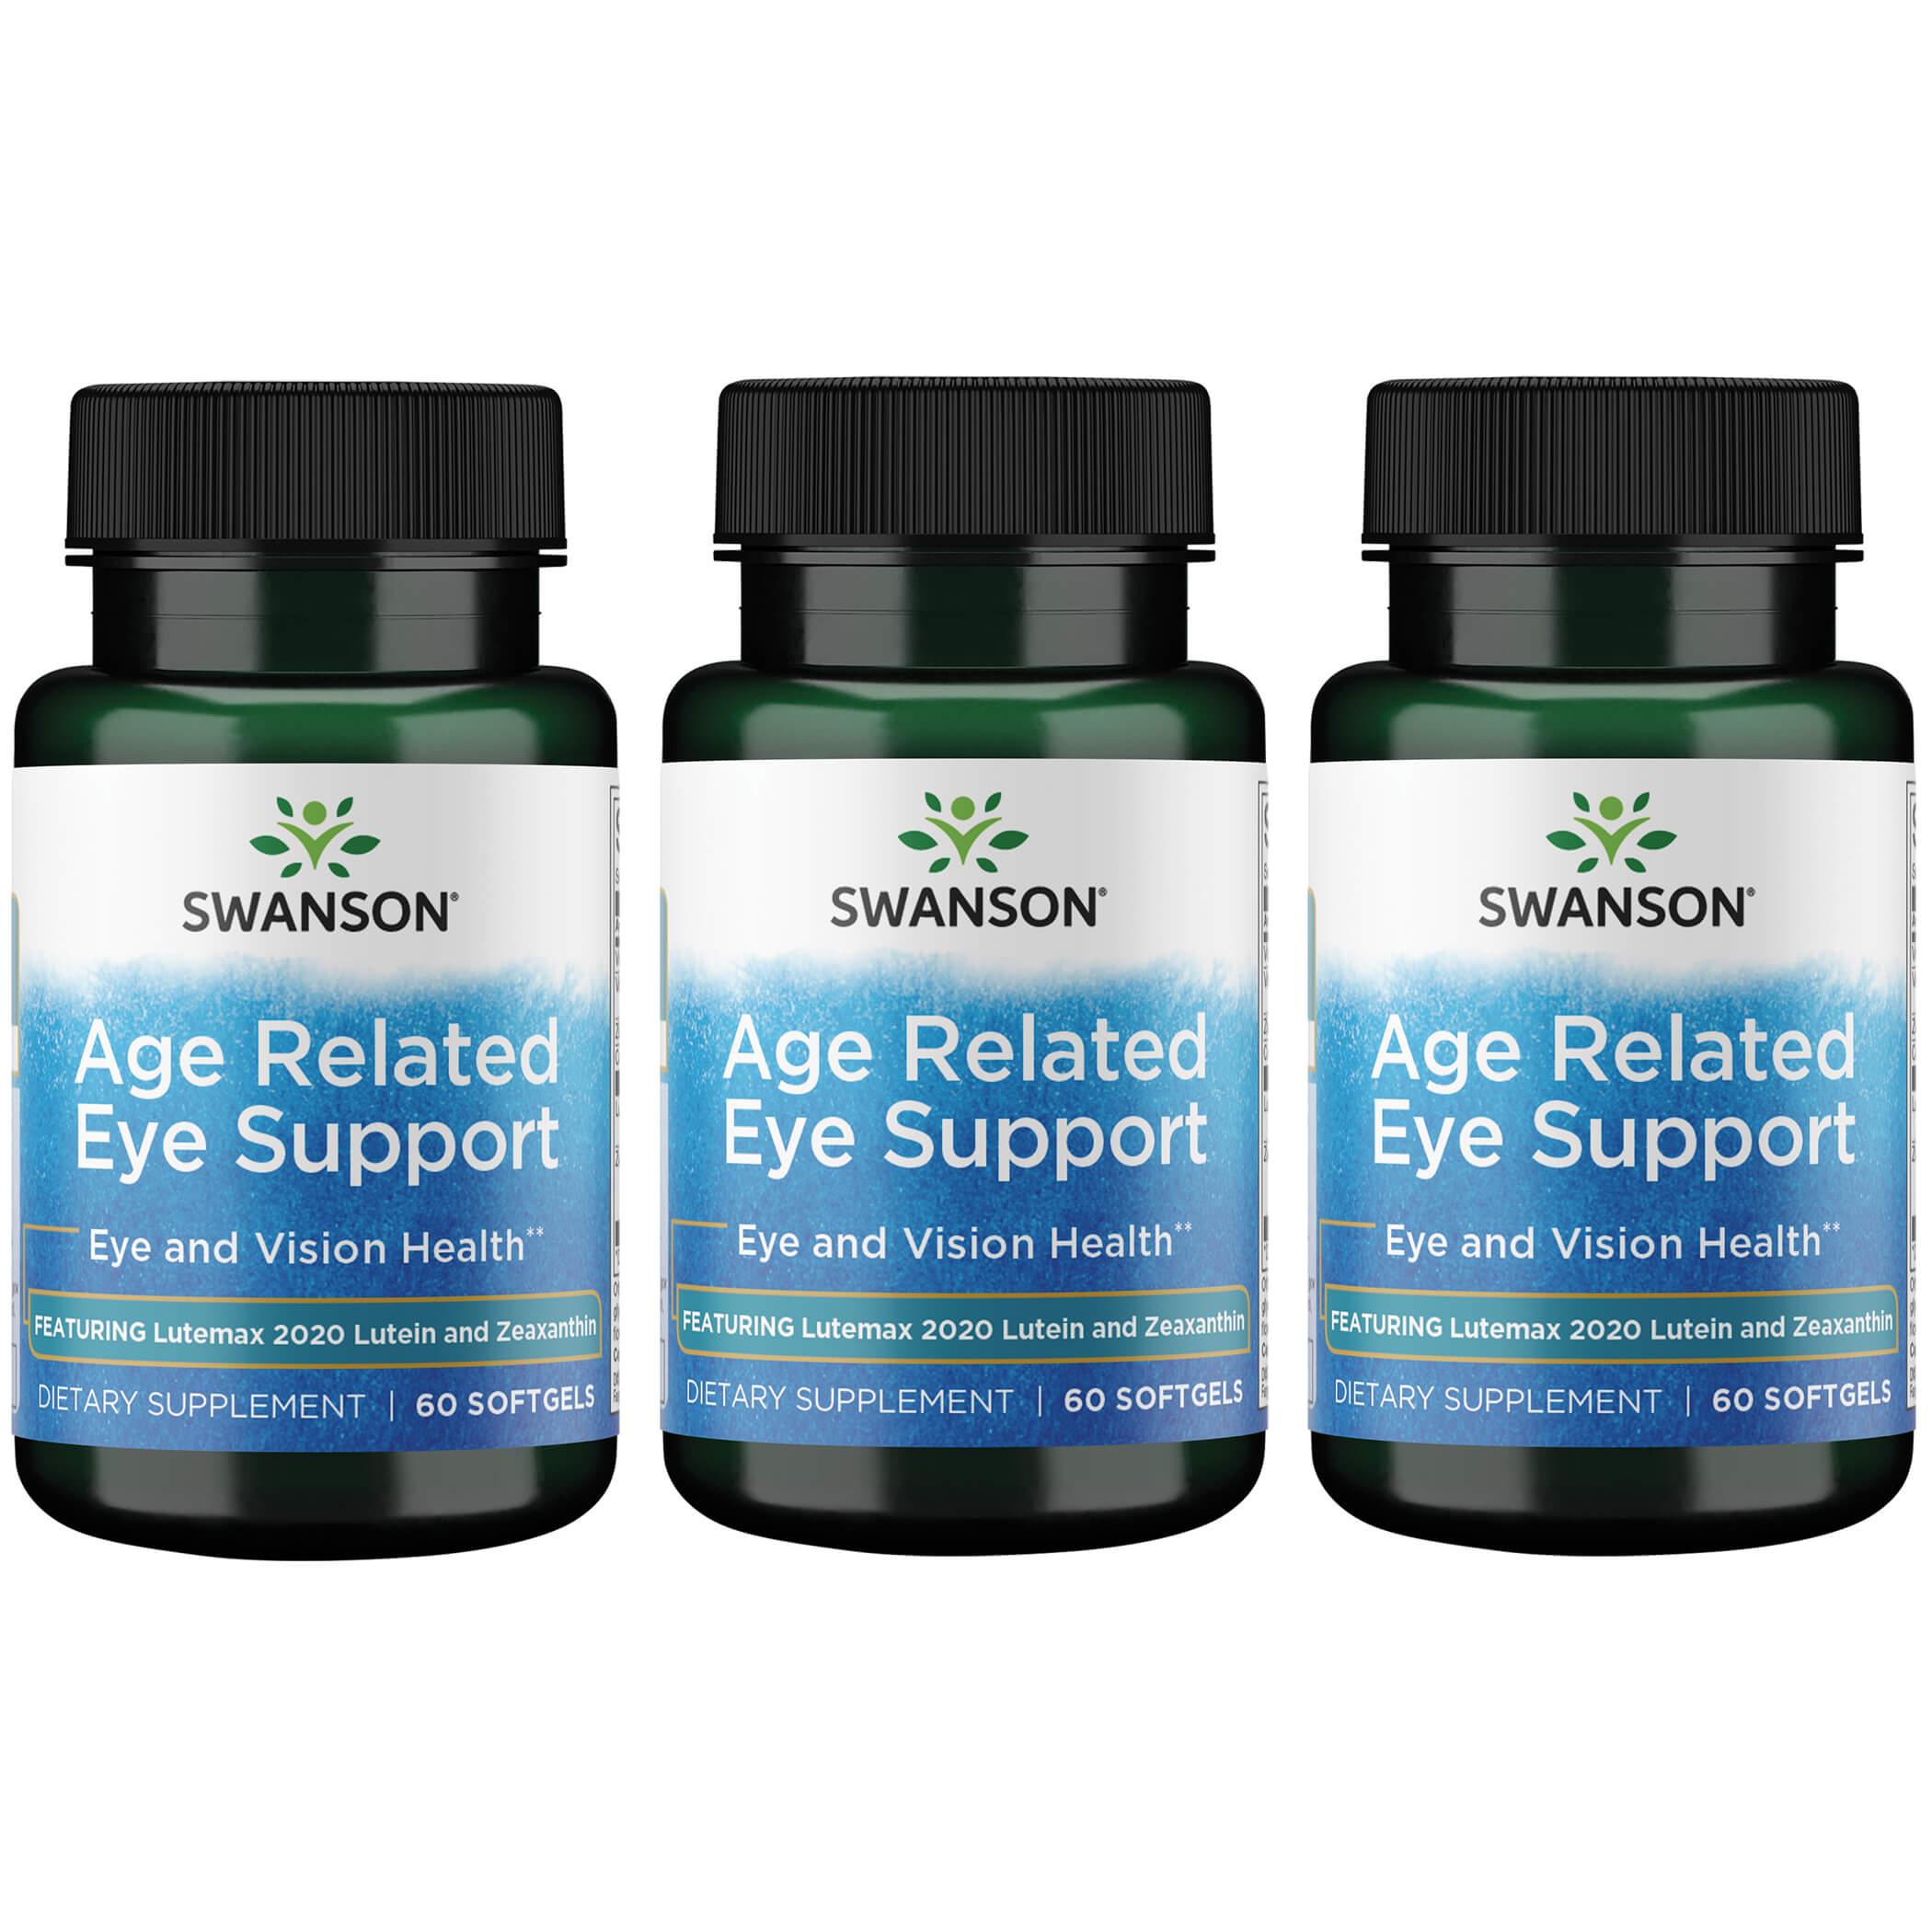 Swanson Premium Age Related Eye Support - Featuring Lutemax Lutein and Zeaxanthin 3 Pack Vitamin 60 Soft Gels